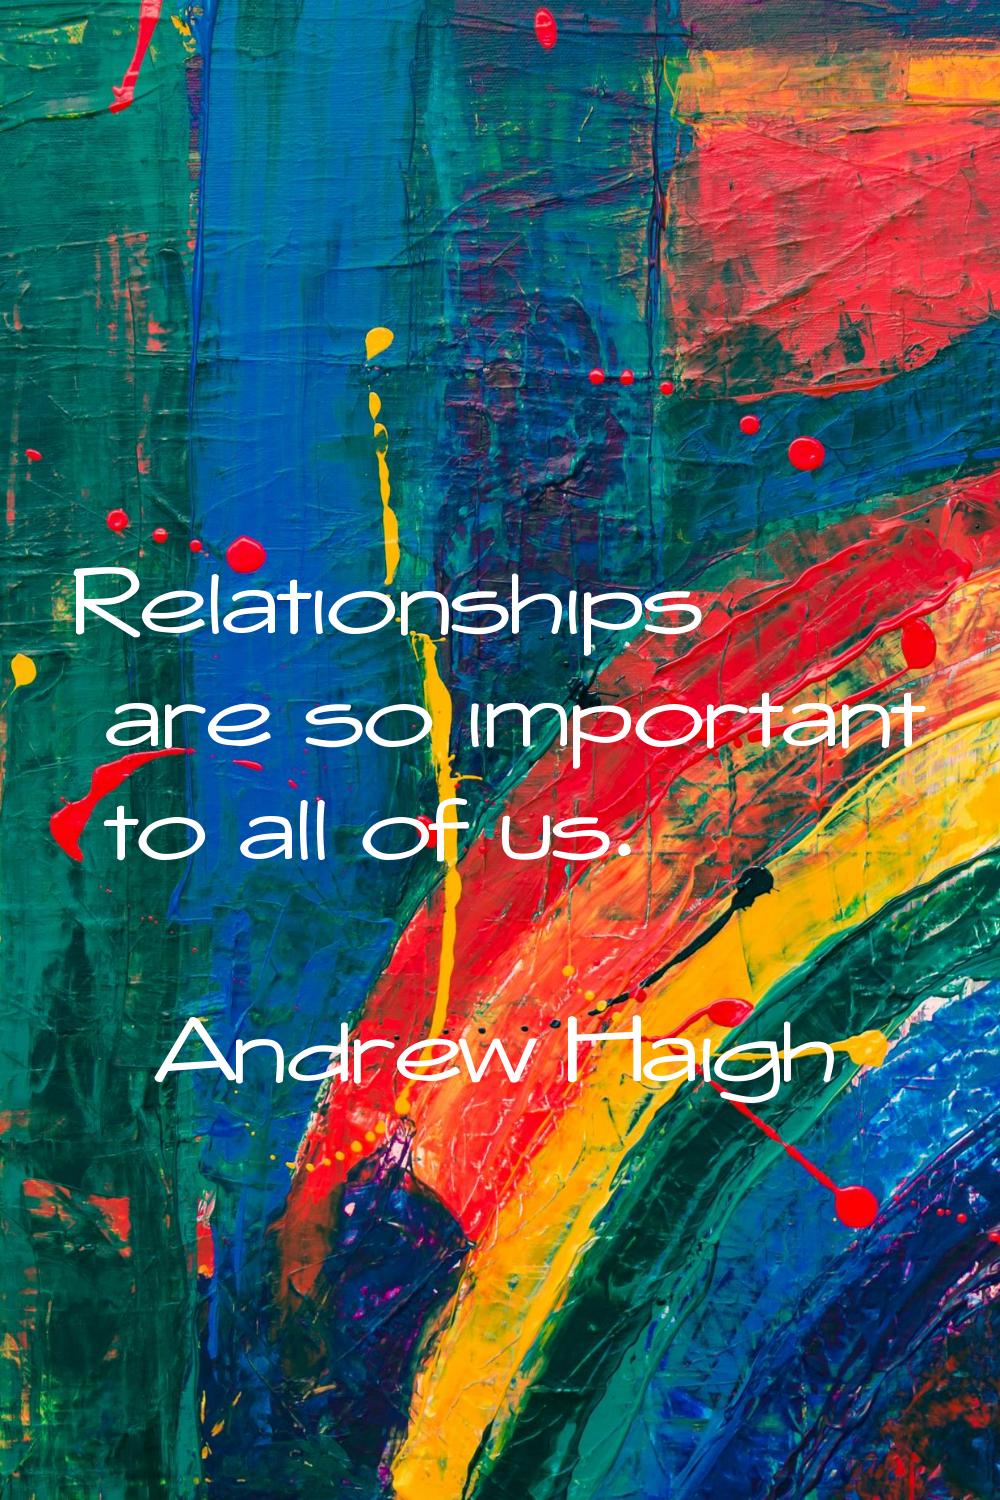 Relationships are so important to all of us.